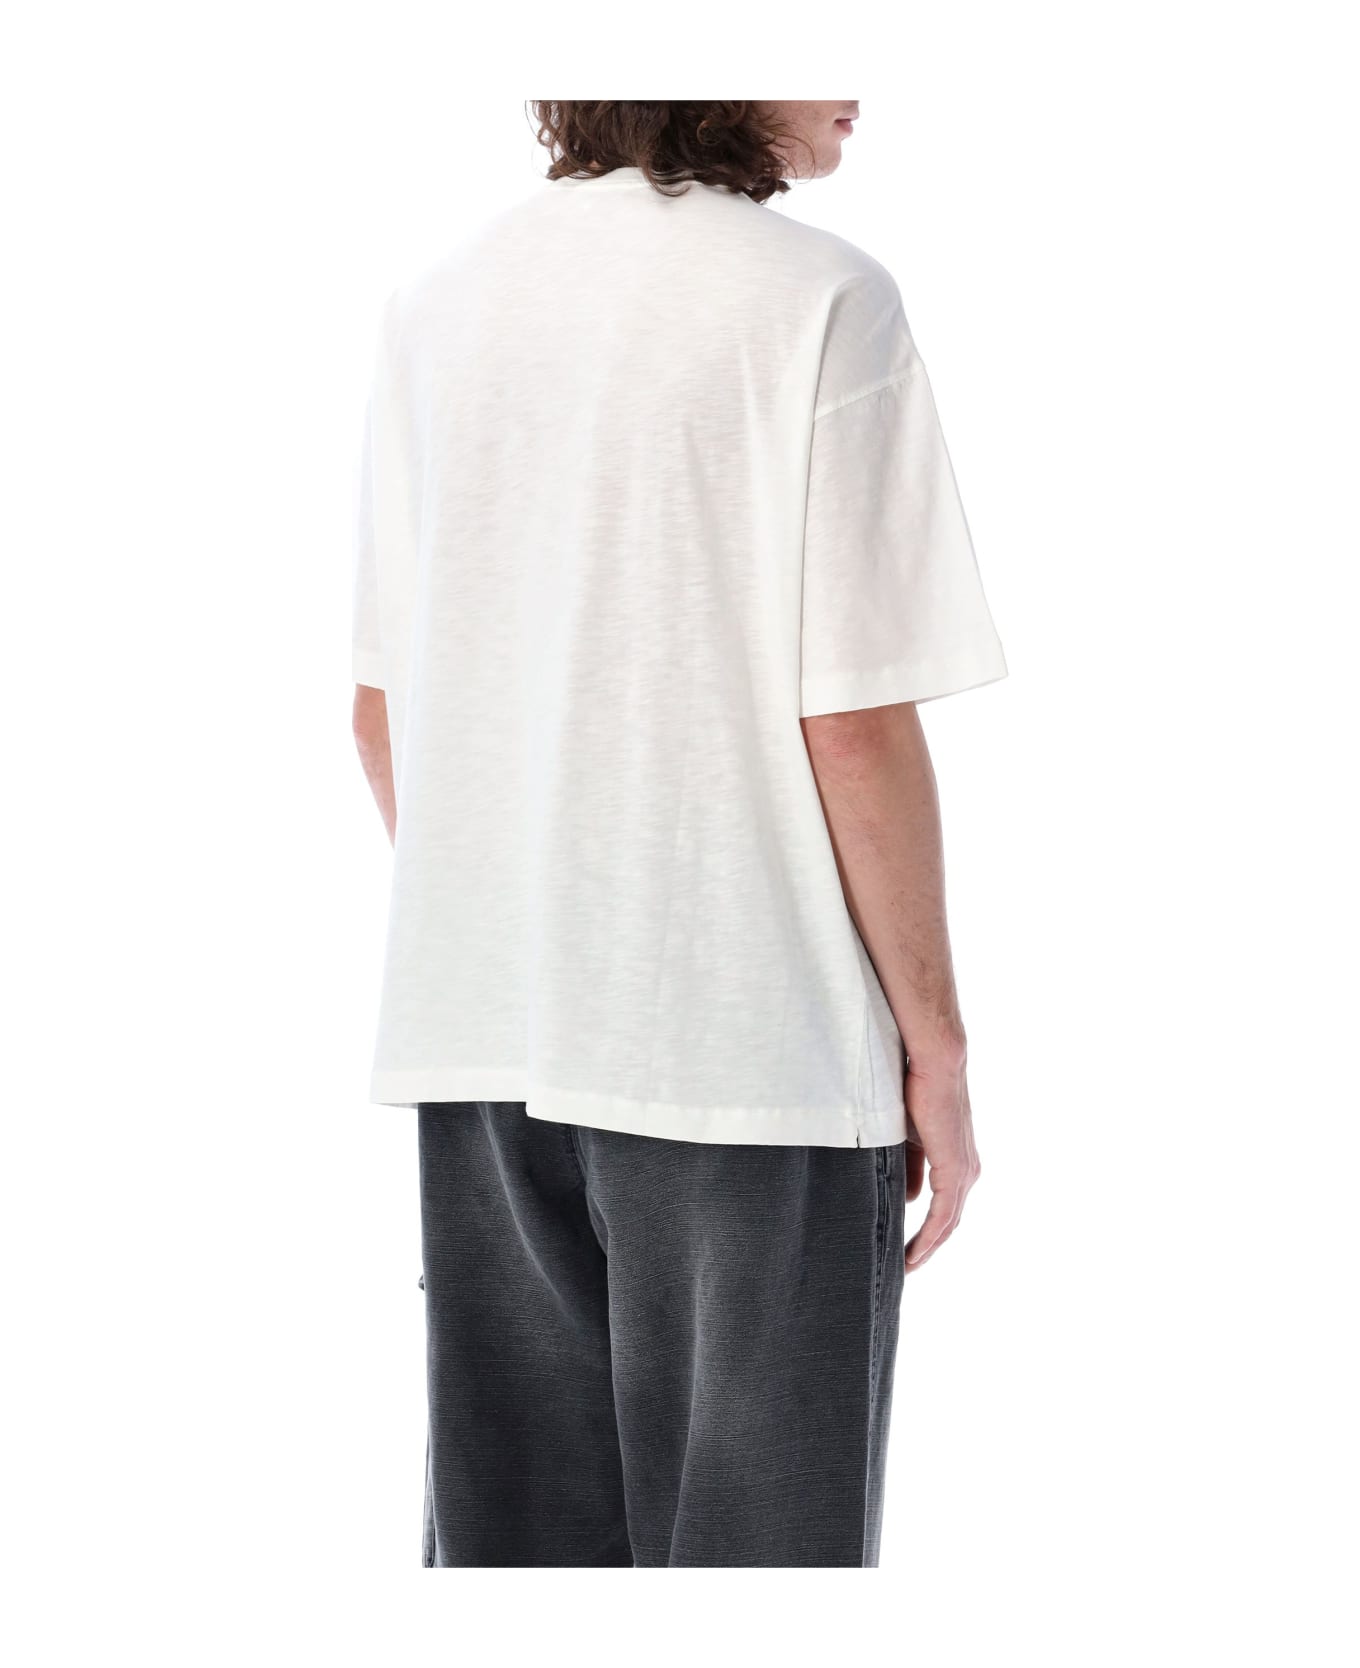 YMC Its Out There T-shirt - WHITE